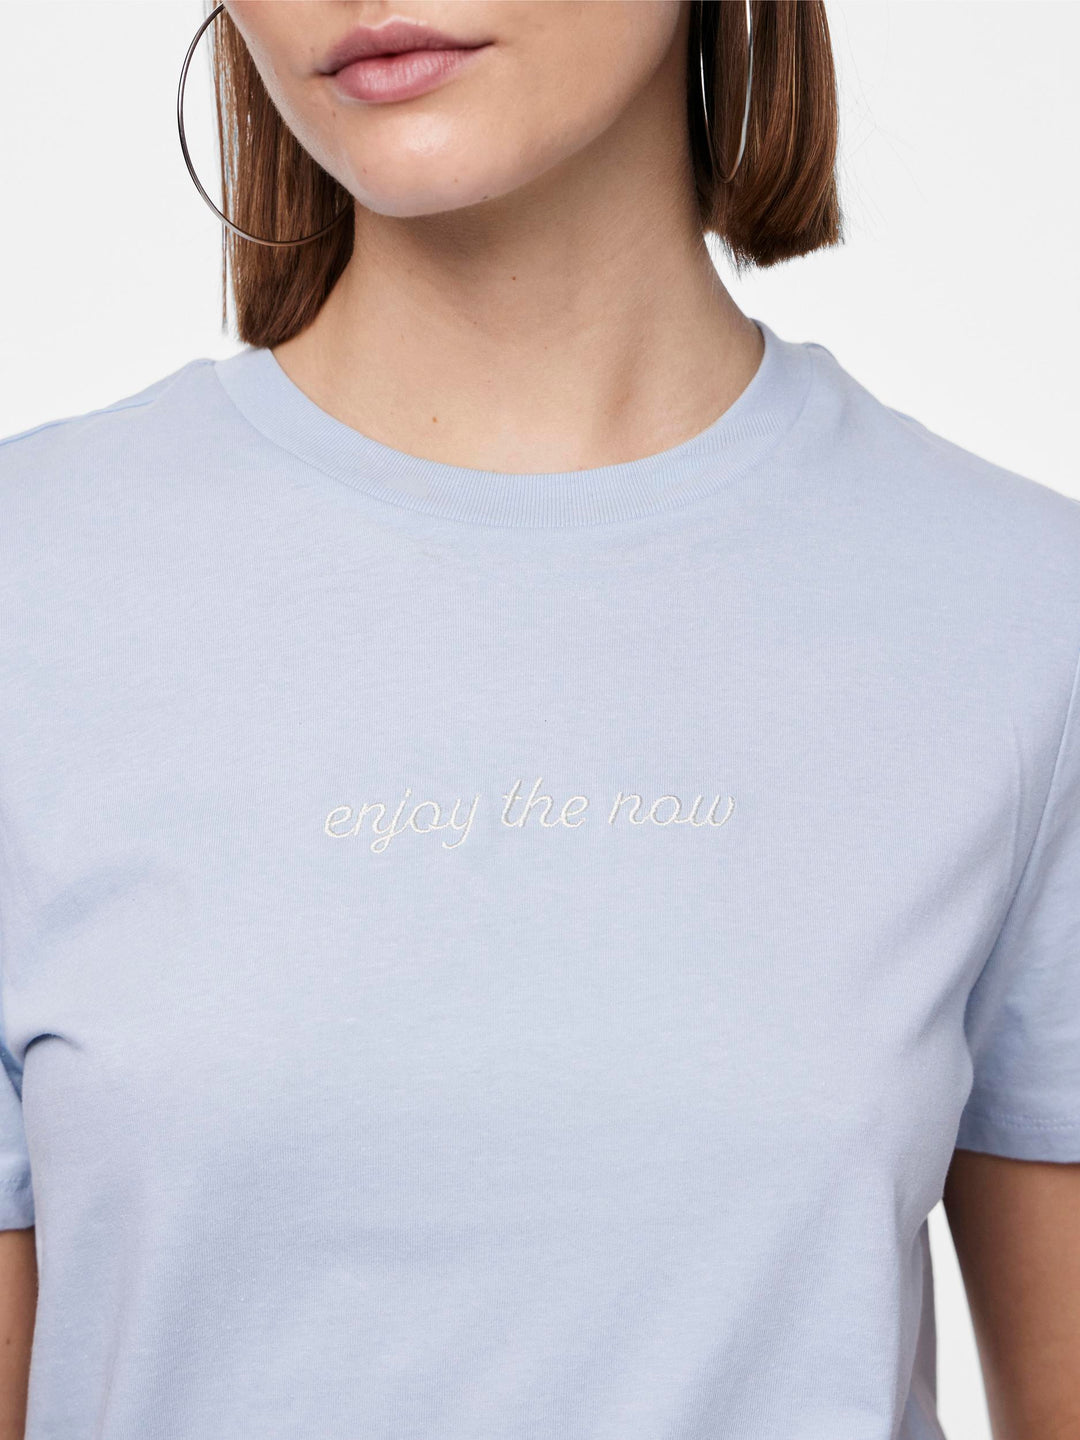 Fria Embroidered T-Shirt - Enjoy Now